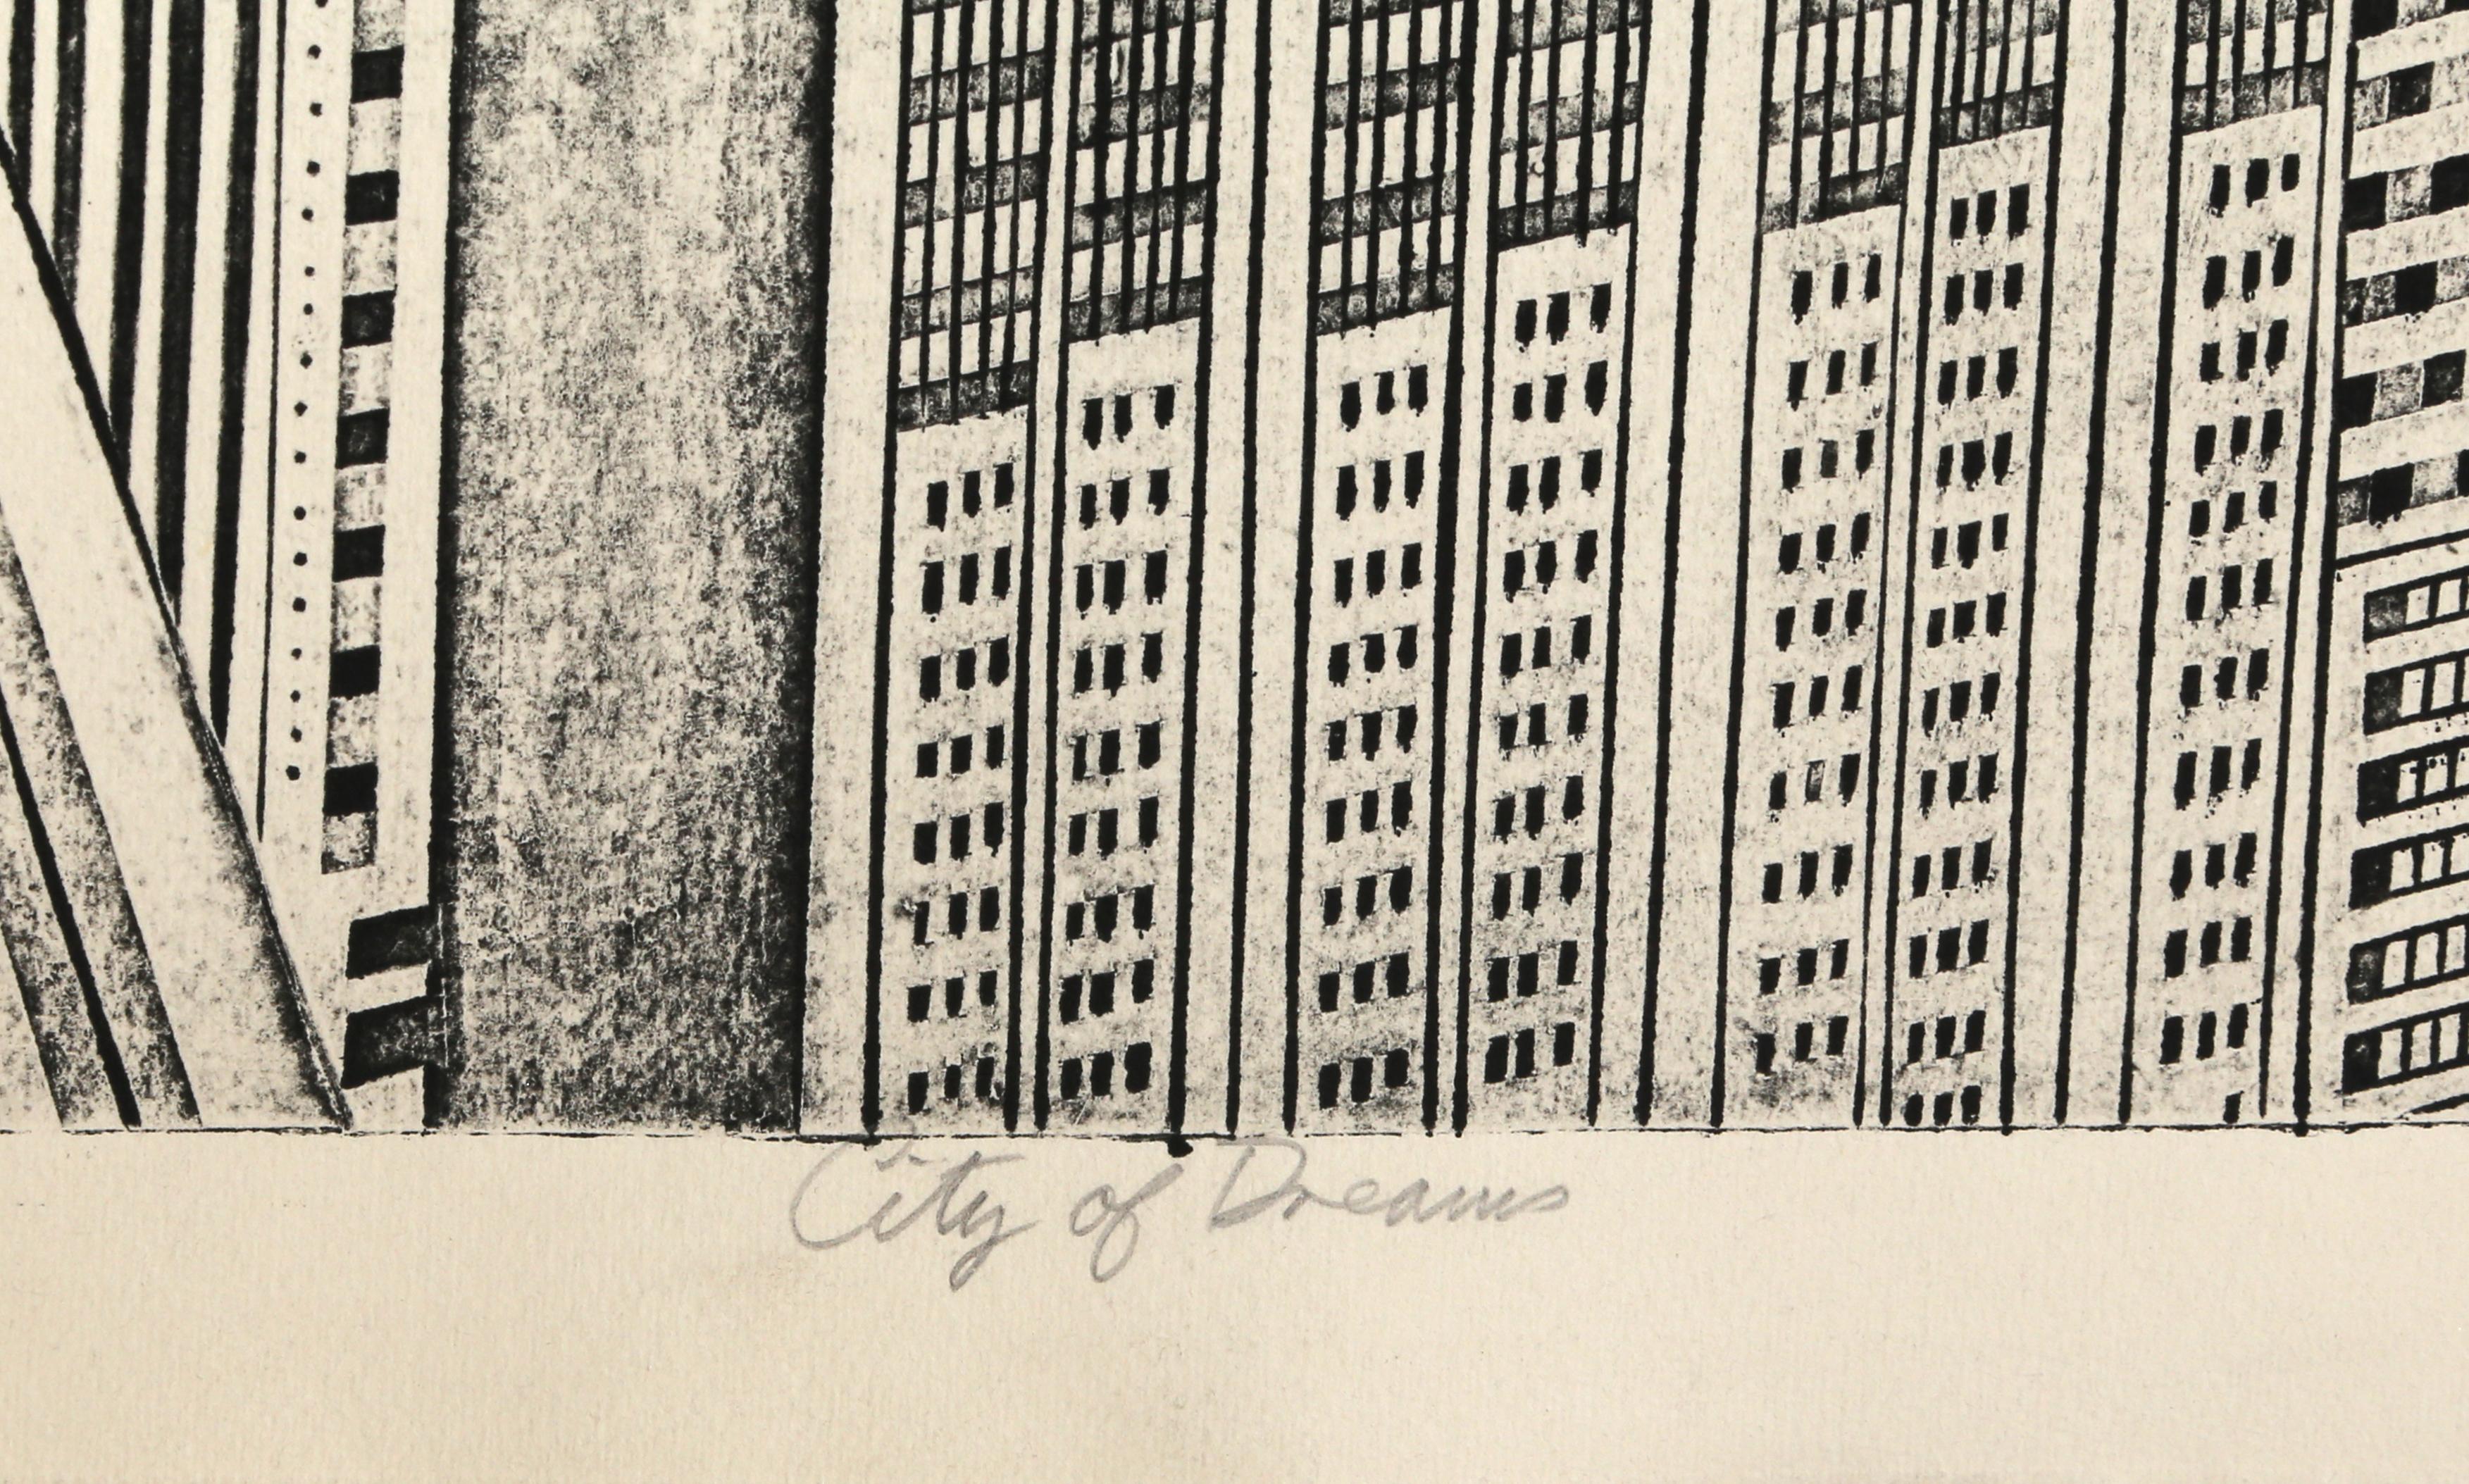 City of Dreams, Etching by John Ross For Sale 1